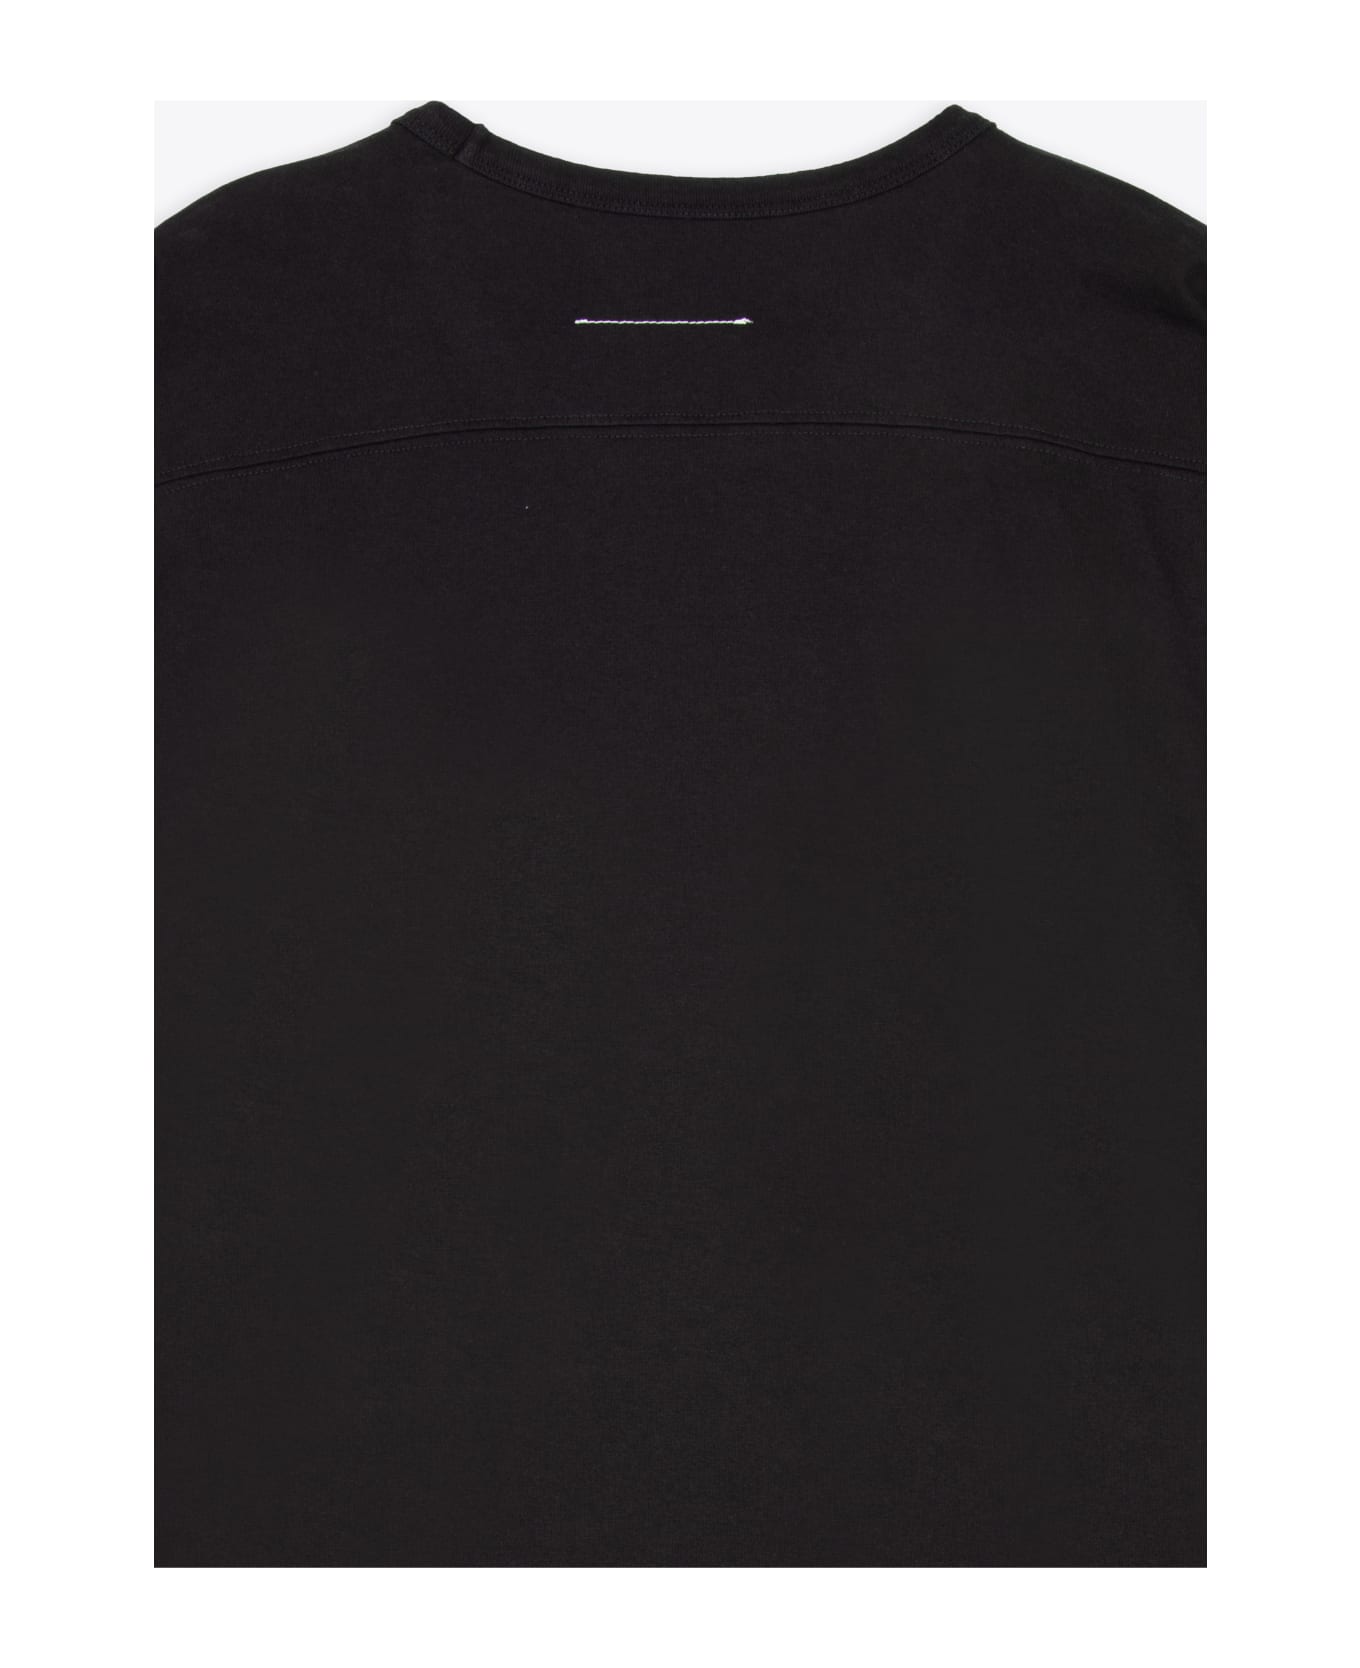 MM6 Maison Margiela T-shirt Black Relaxed T-shirt With 3/4 Sleeves Lenght - Nero シャツ